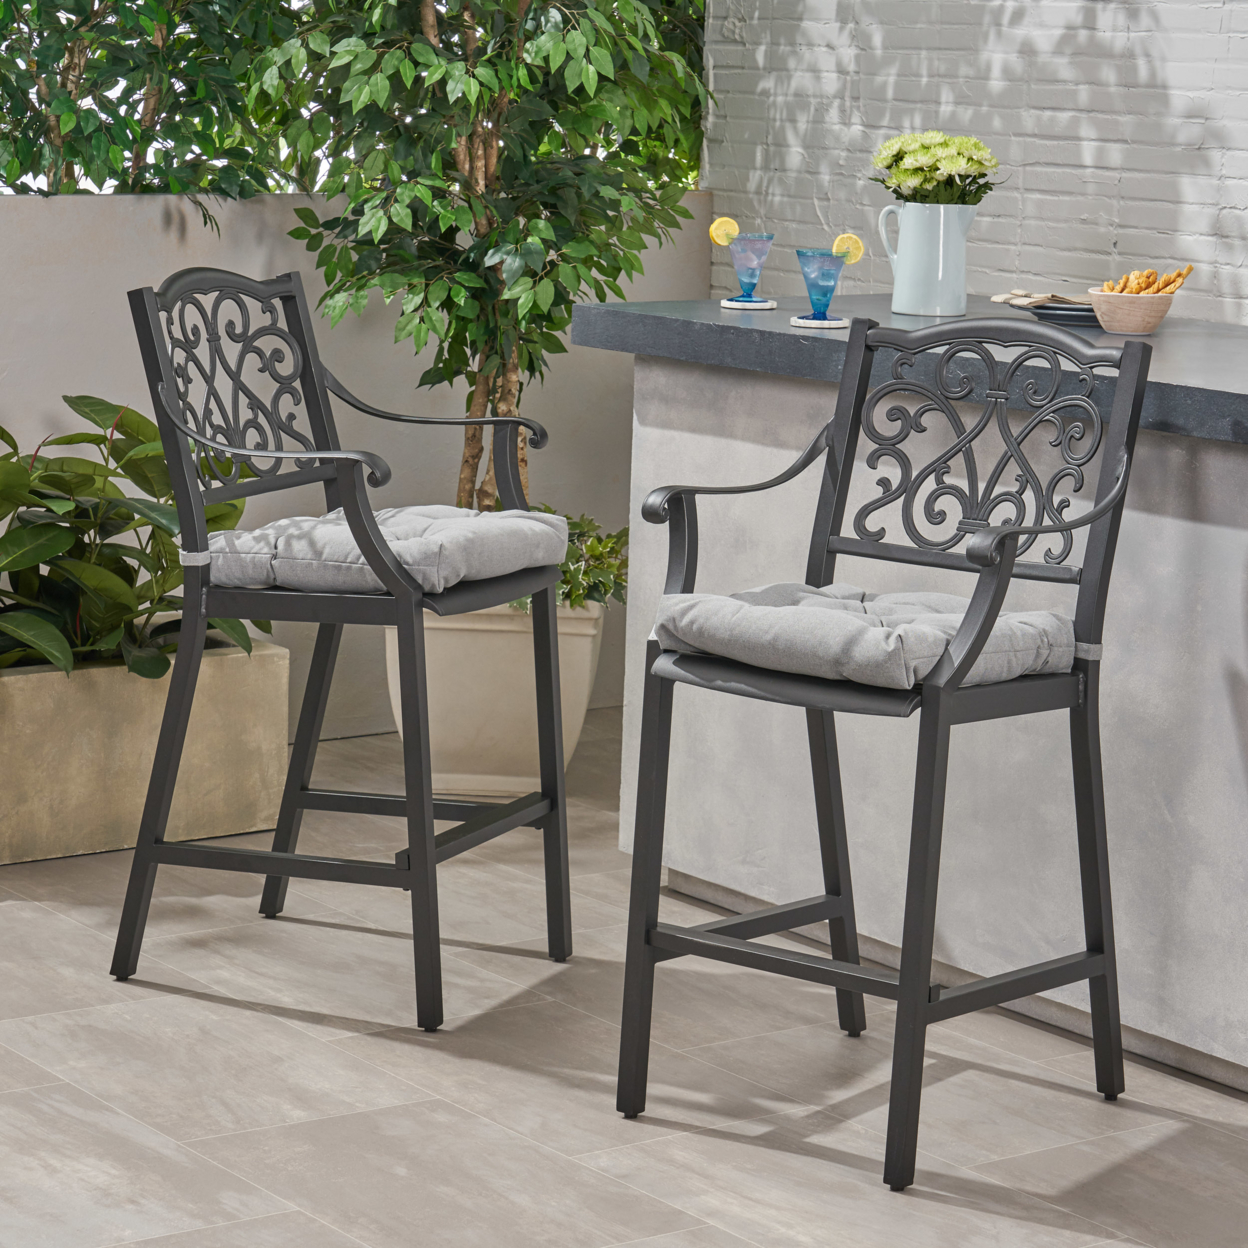 Frances Outdoor Barstool With Cushion (Set Of 2) Antique Matte Black And Charcoal - Antique Matte Black + Charcoal